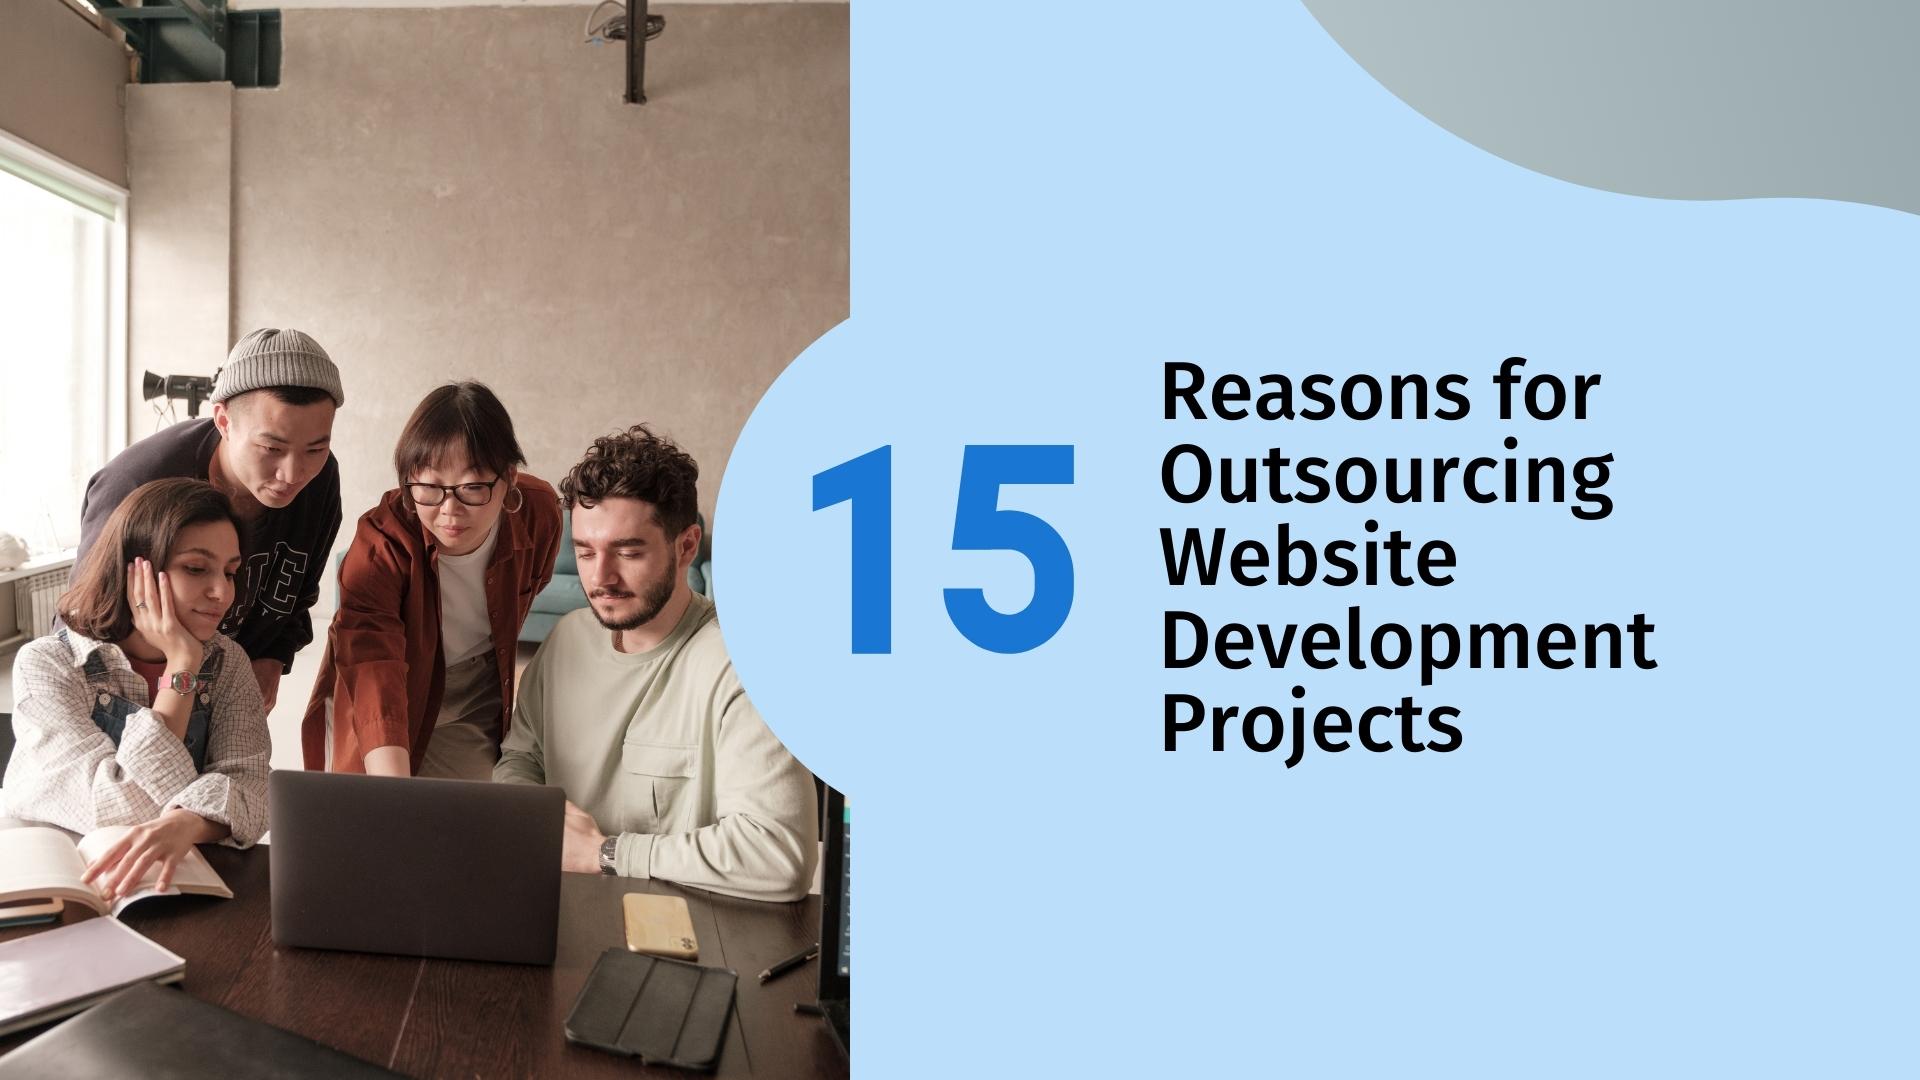 Outsourcing Website Development Projects